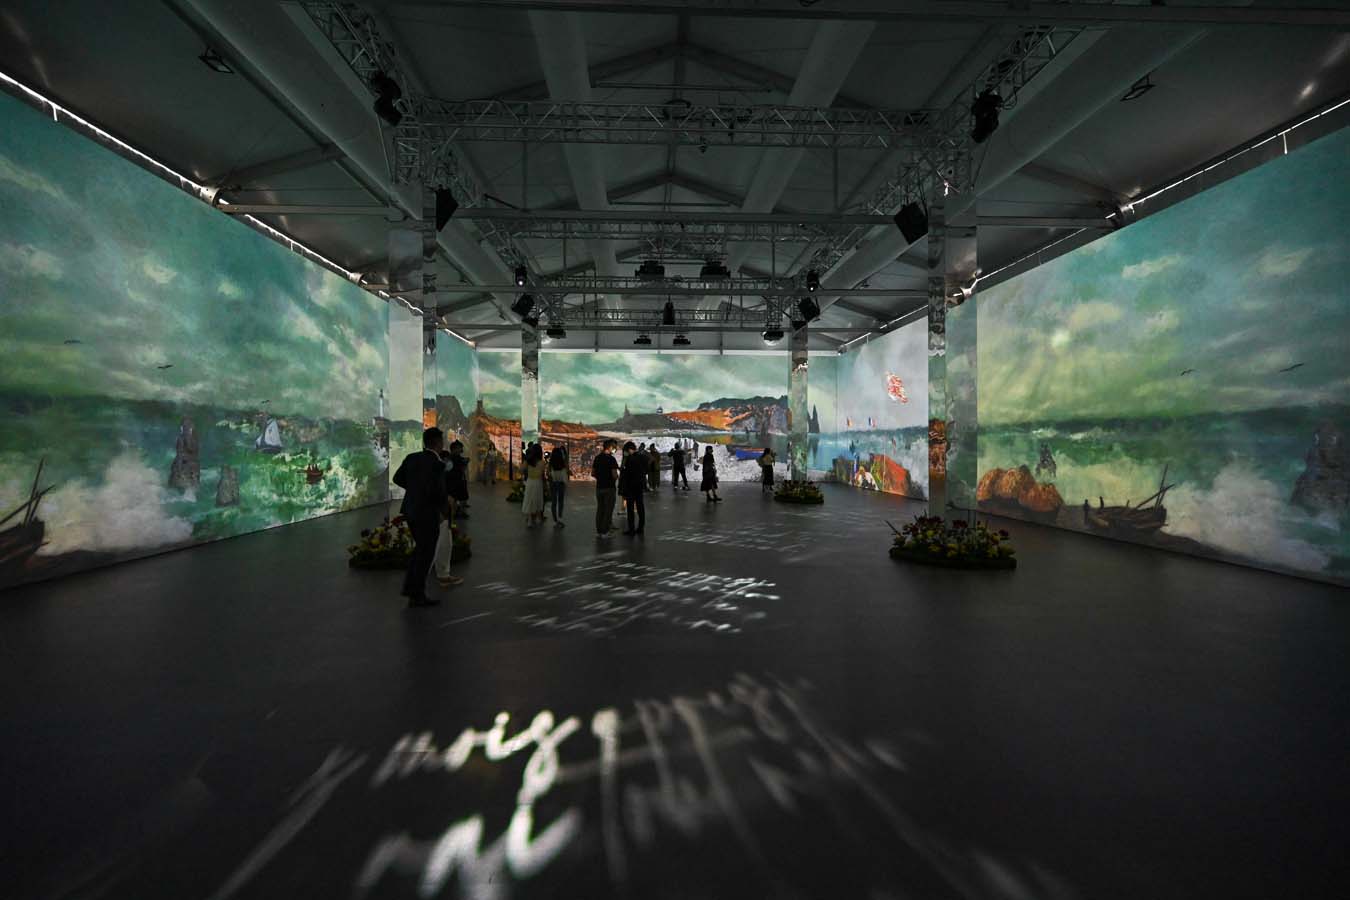 En Voyage with Claude Monet at West Kowloon Cultural District (2022)